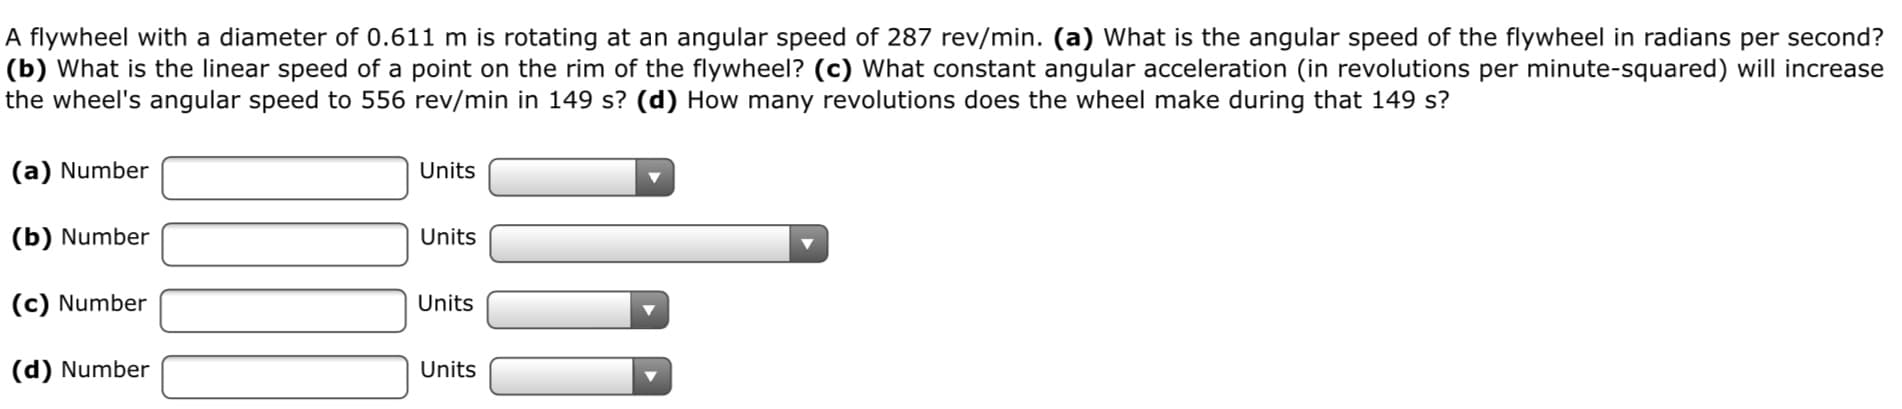 A flywheel with a diameter of 0.611 m is rotating at an angular speed of 287 rev/min. (a) What is the angular speed of the flywheel in radians per second?
|(b) What is the linear speed of a point on the rim of the flywheel? (c) What constant angular acceleration (in revolutions per minute-squared) will increase
the wheel's angular speed to 556 rev/min in 149 s? (d) How many revolutions does the wheel make during that 149 s?
(a) Number
Units
(b) Number
Units
(c) Number
Units
(d) Number
Units
